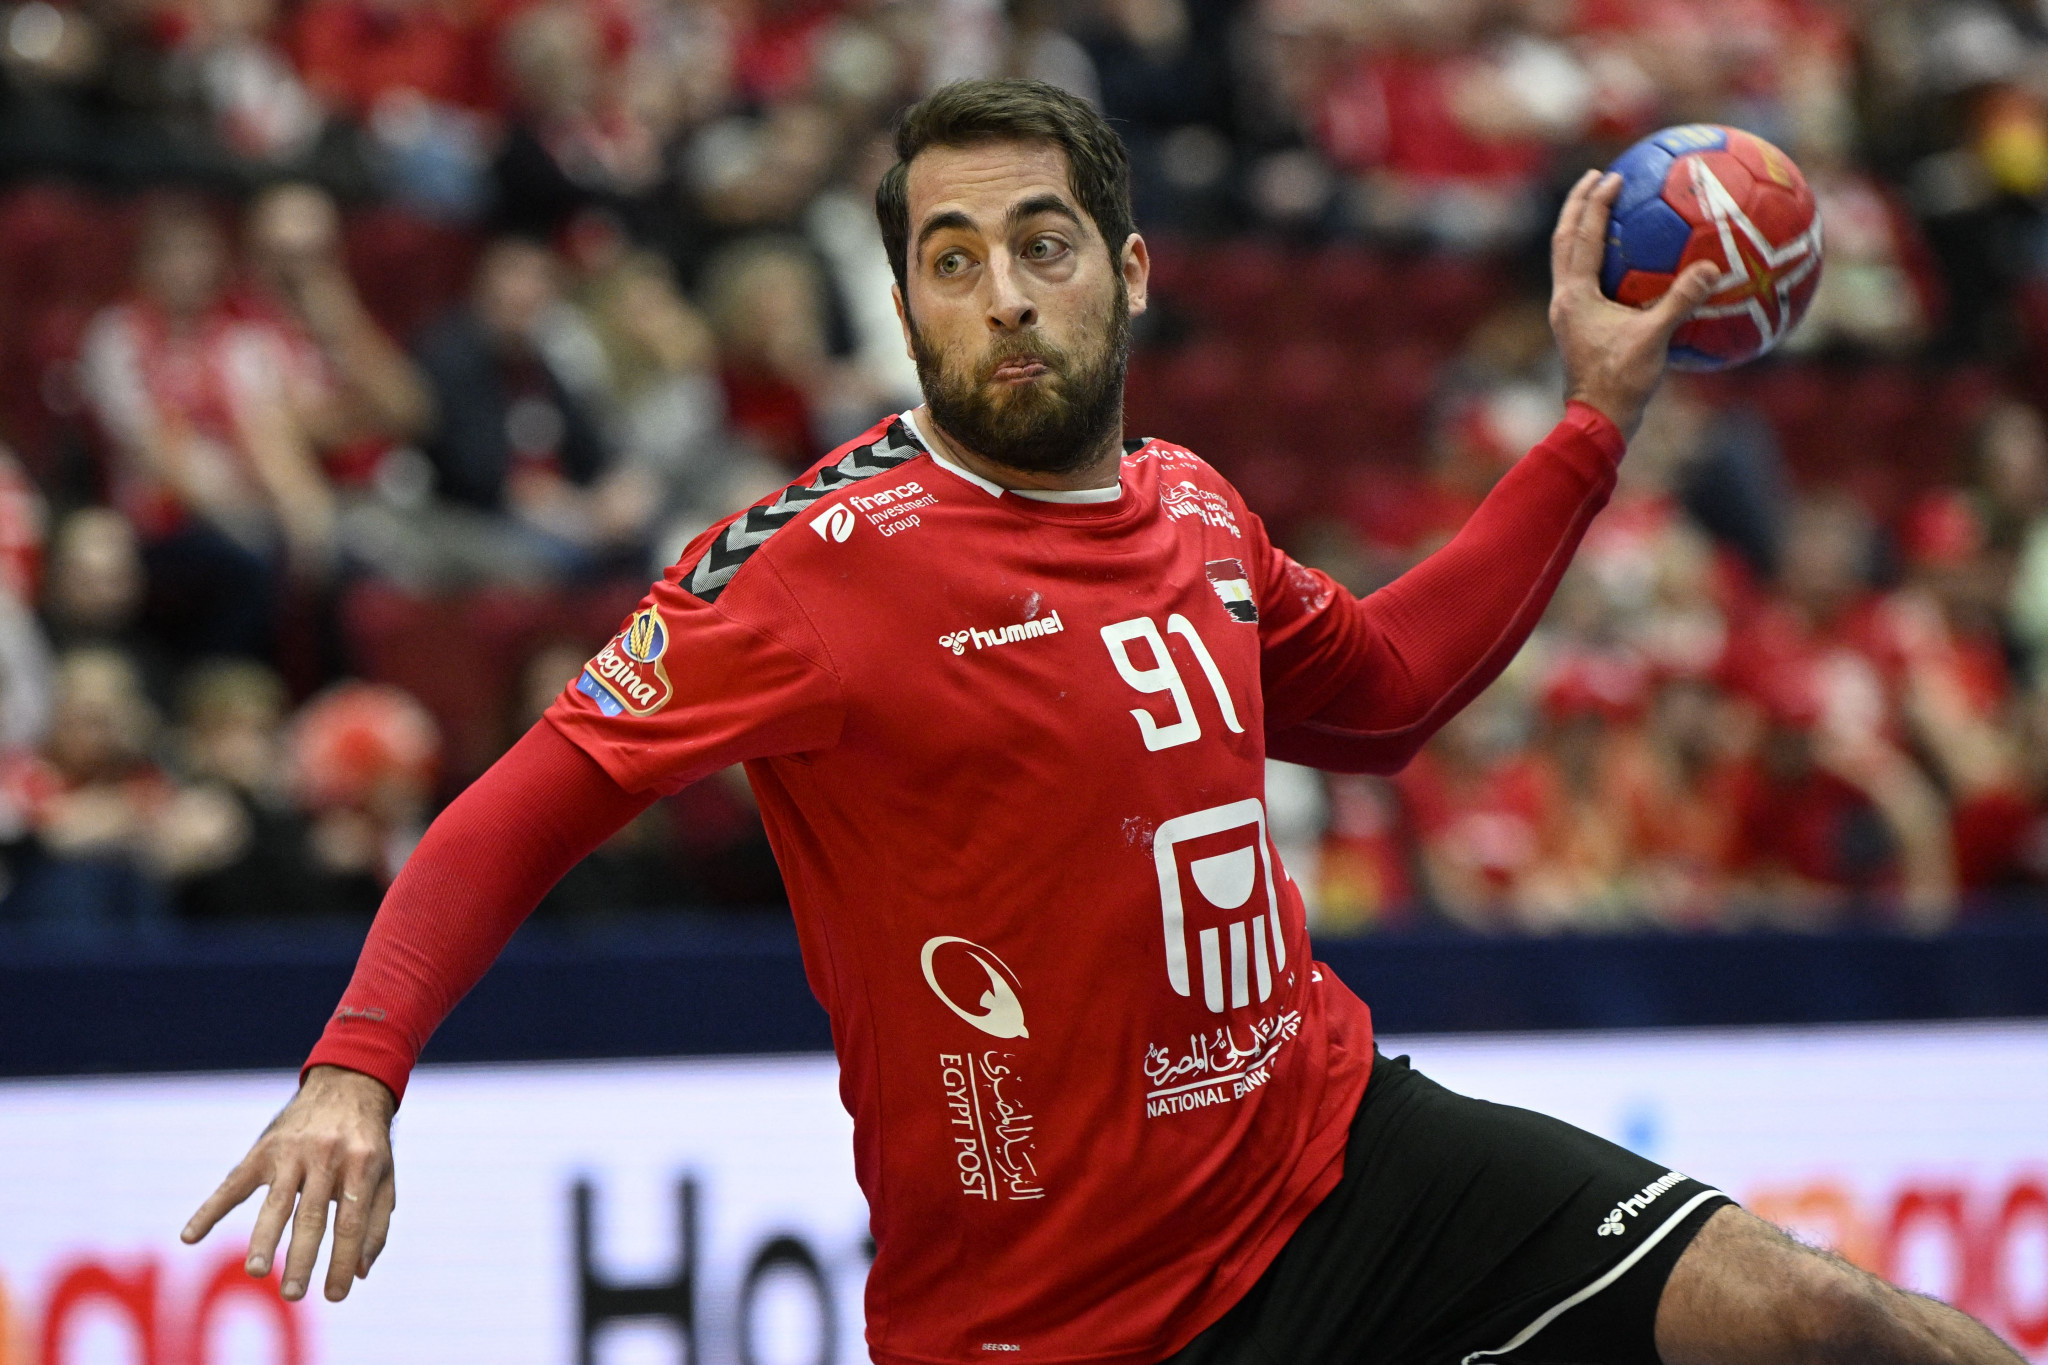 Egypt, Germany and Norway latest teams to seal quarter-final spots at World Men’s Handball Championship